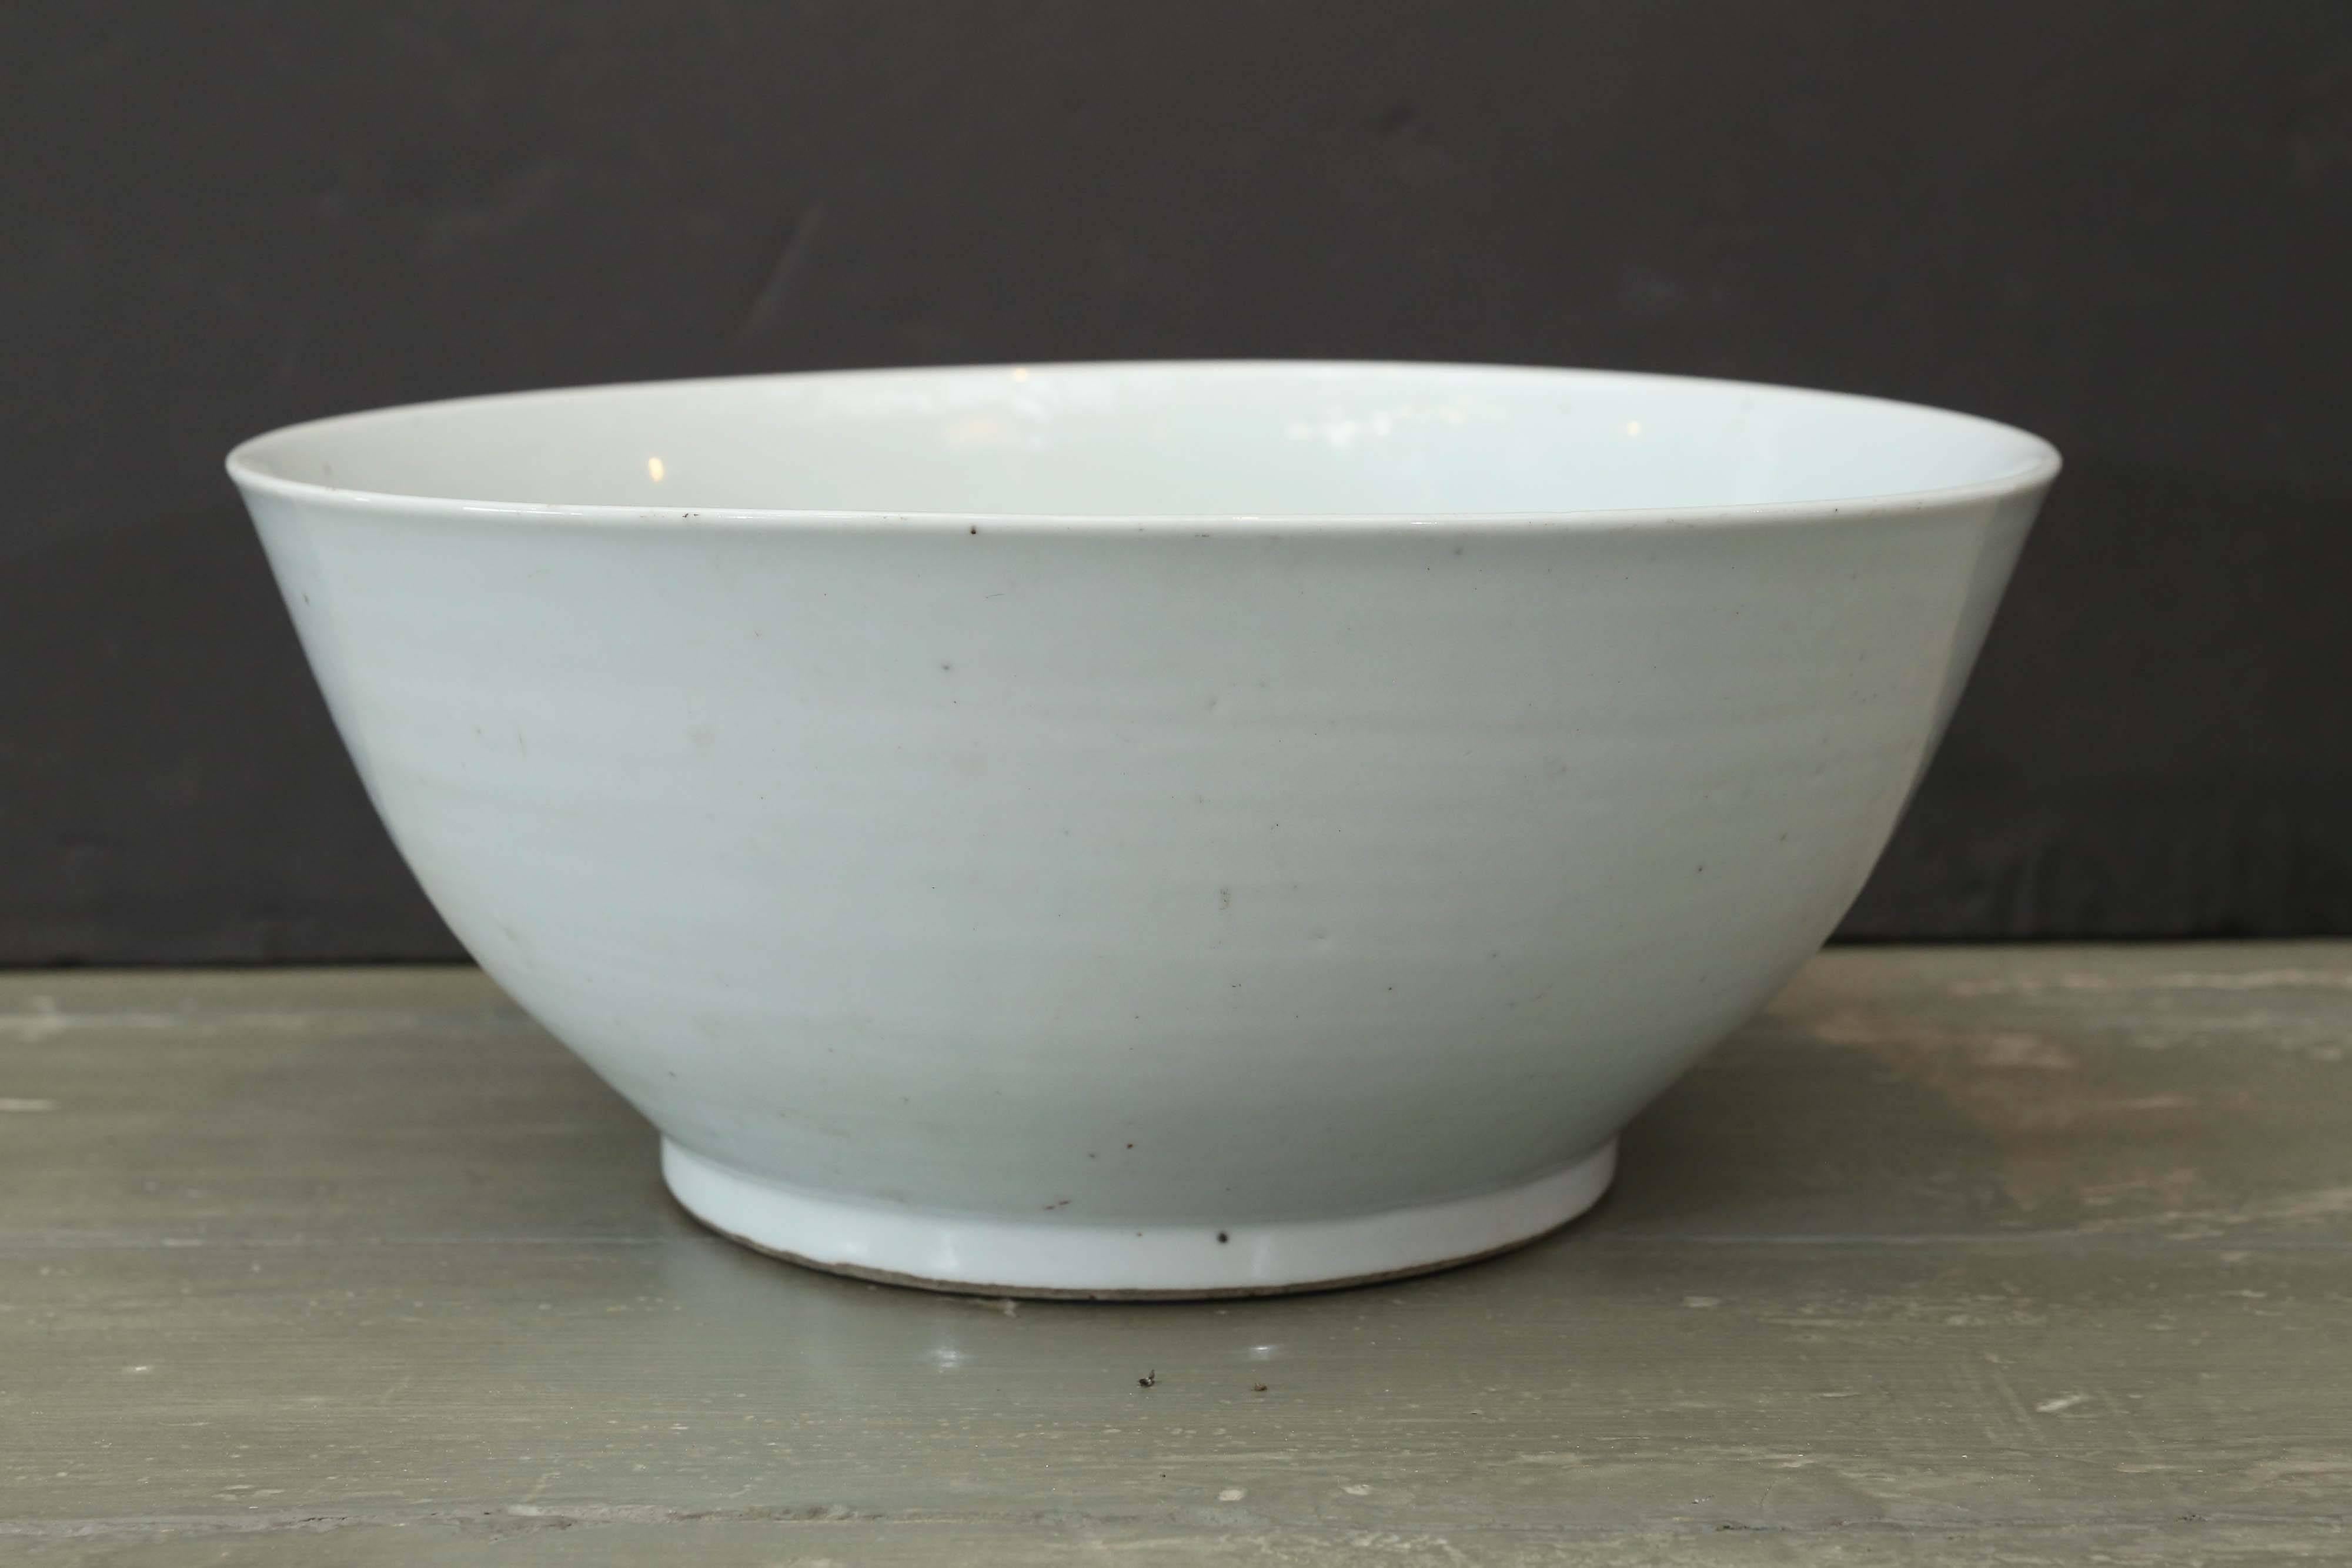 19th century white porcelain bowl from the Qing Dynasty Era in China. Rust spots and firing imperfections support the age of the porcelains.